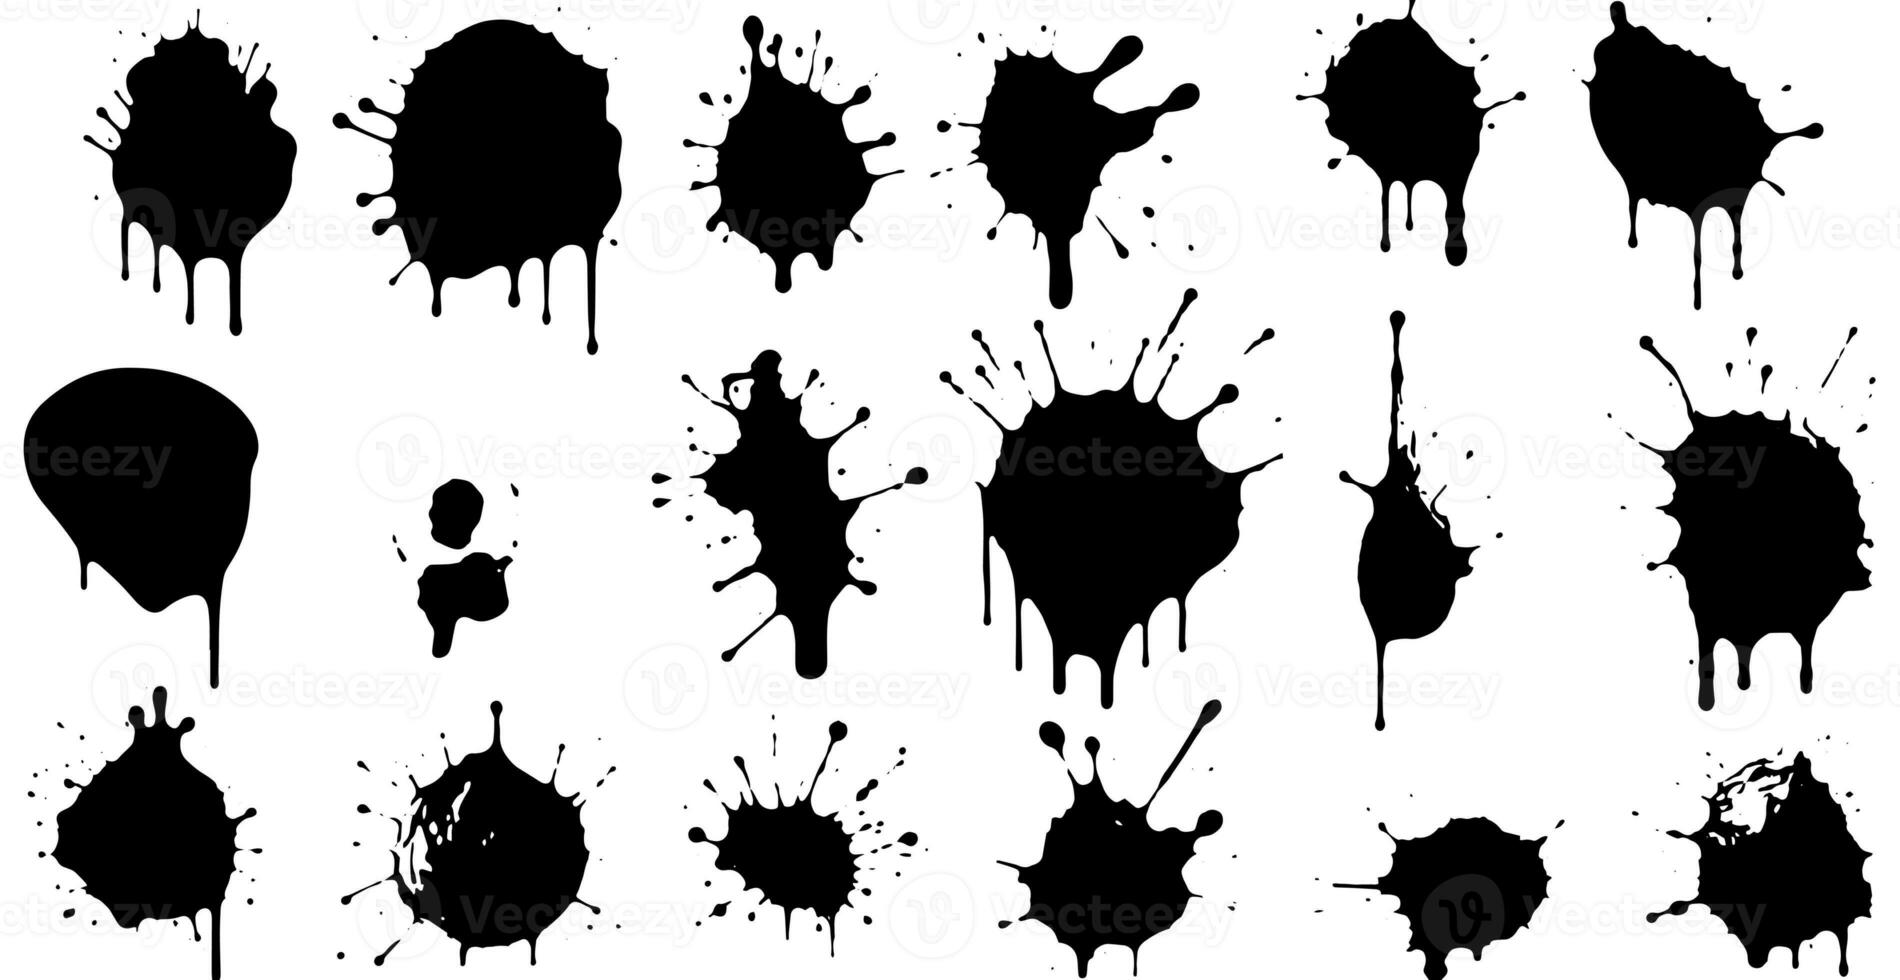 Set of vector brushes. Mega pack set of different brush strokes, black ink splatter, blots, round freehand drawings, grungy drawn lines, waves, circles, triangles, art design elements photo